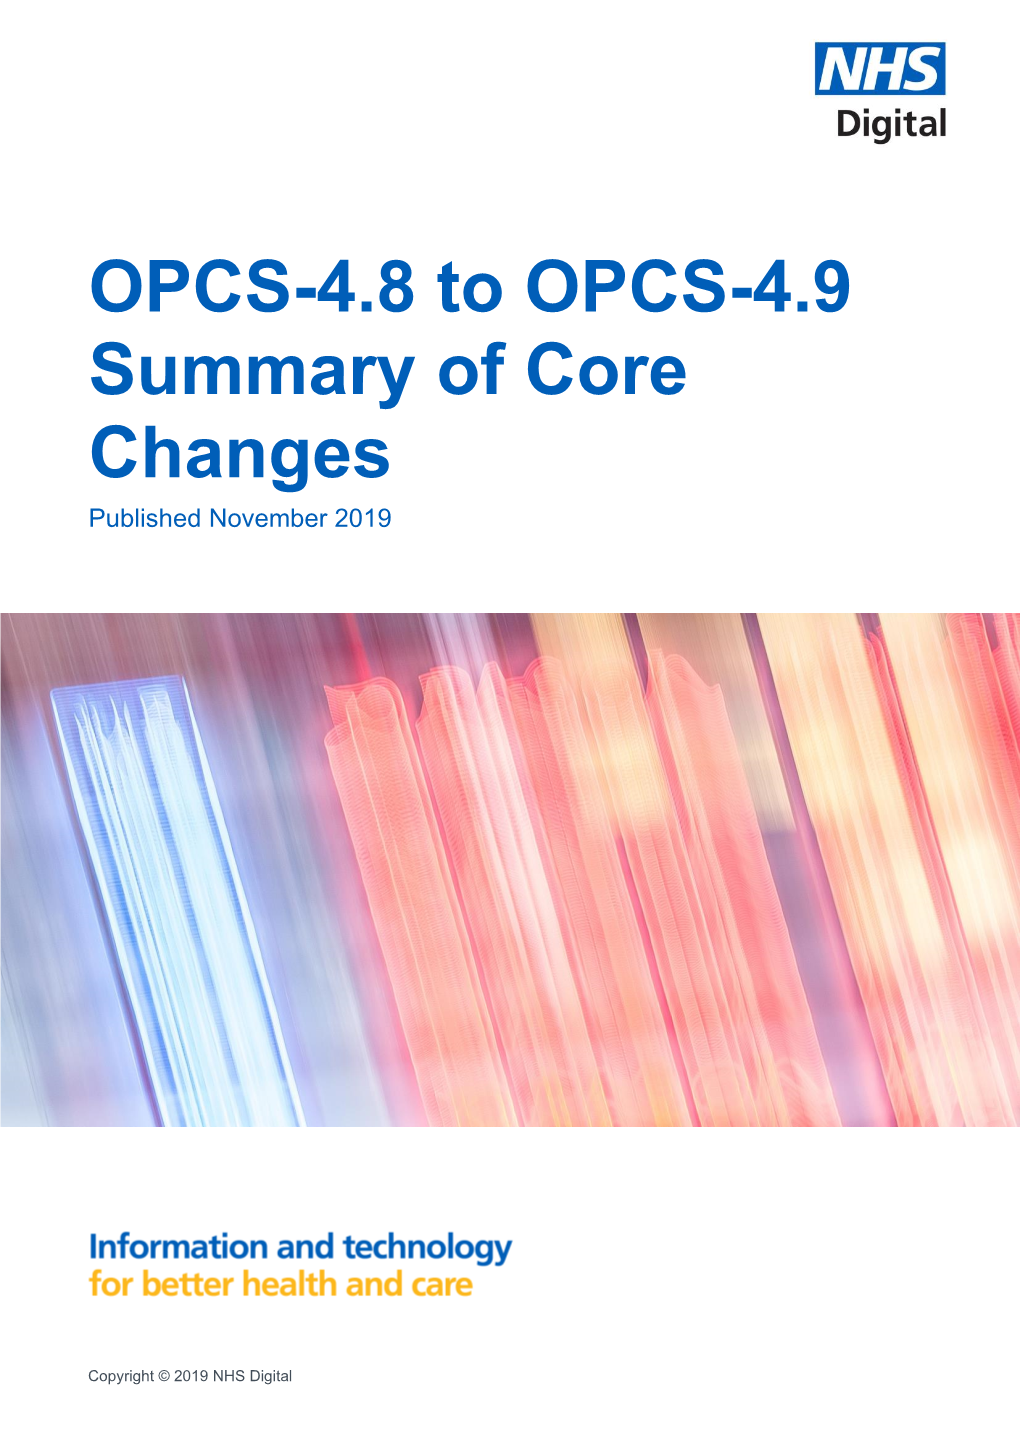 OPCS-4.8 to OPCS-4.9 Summary of Core Changes Contents